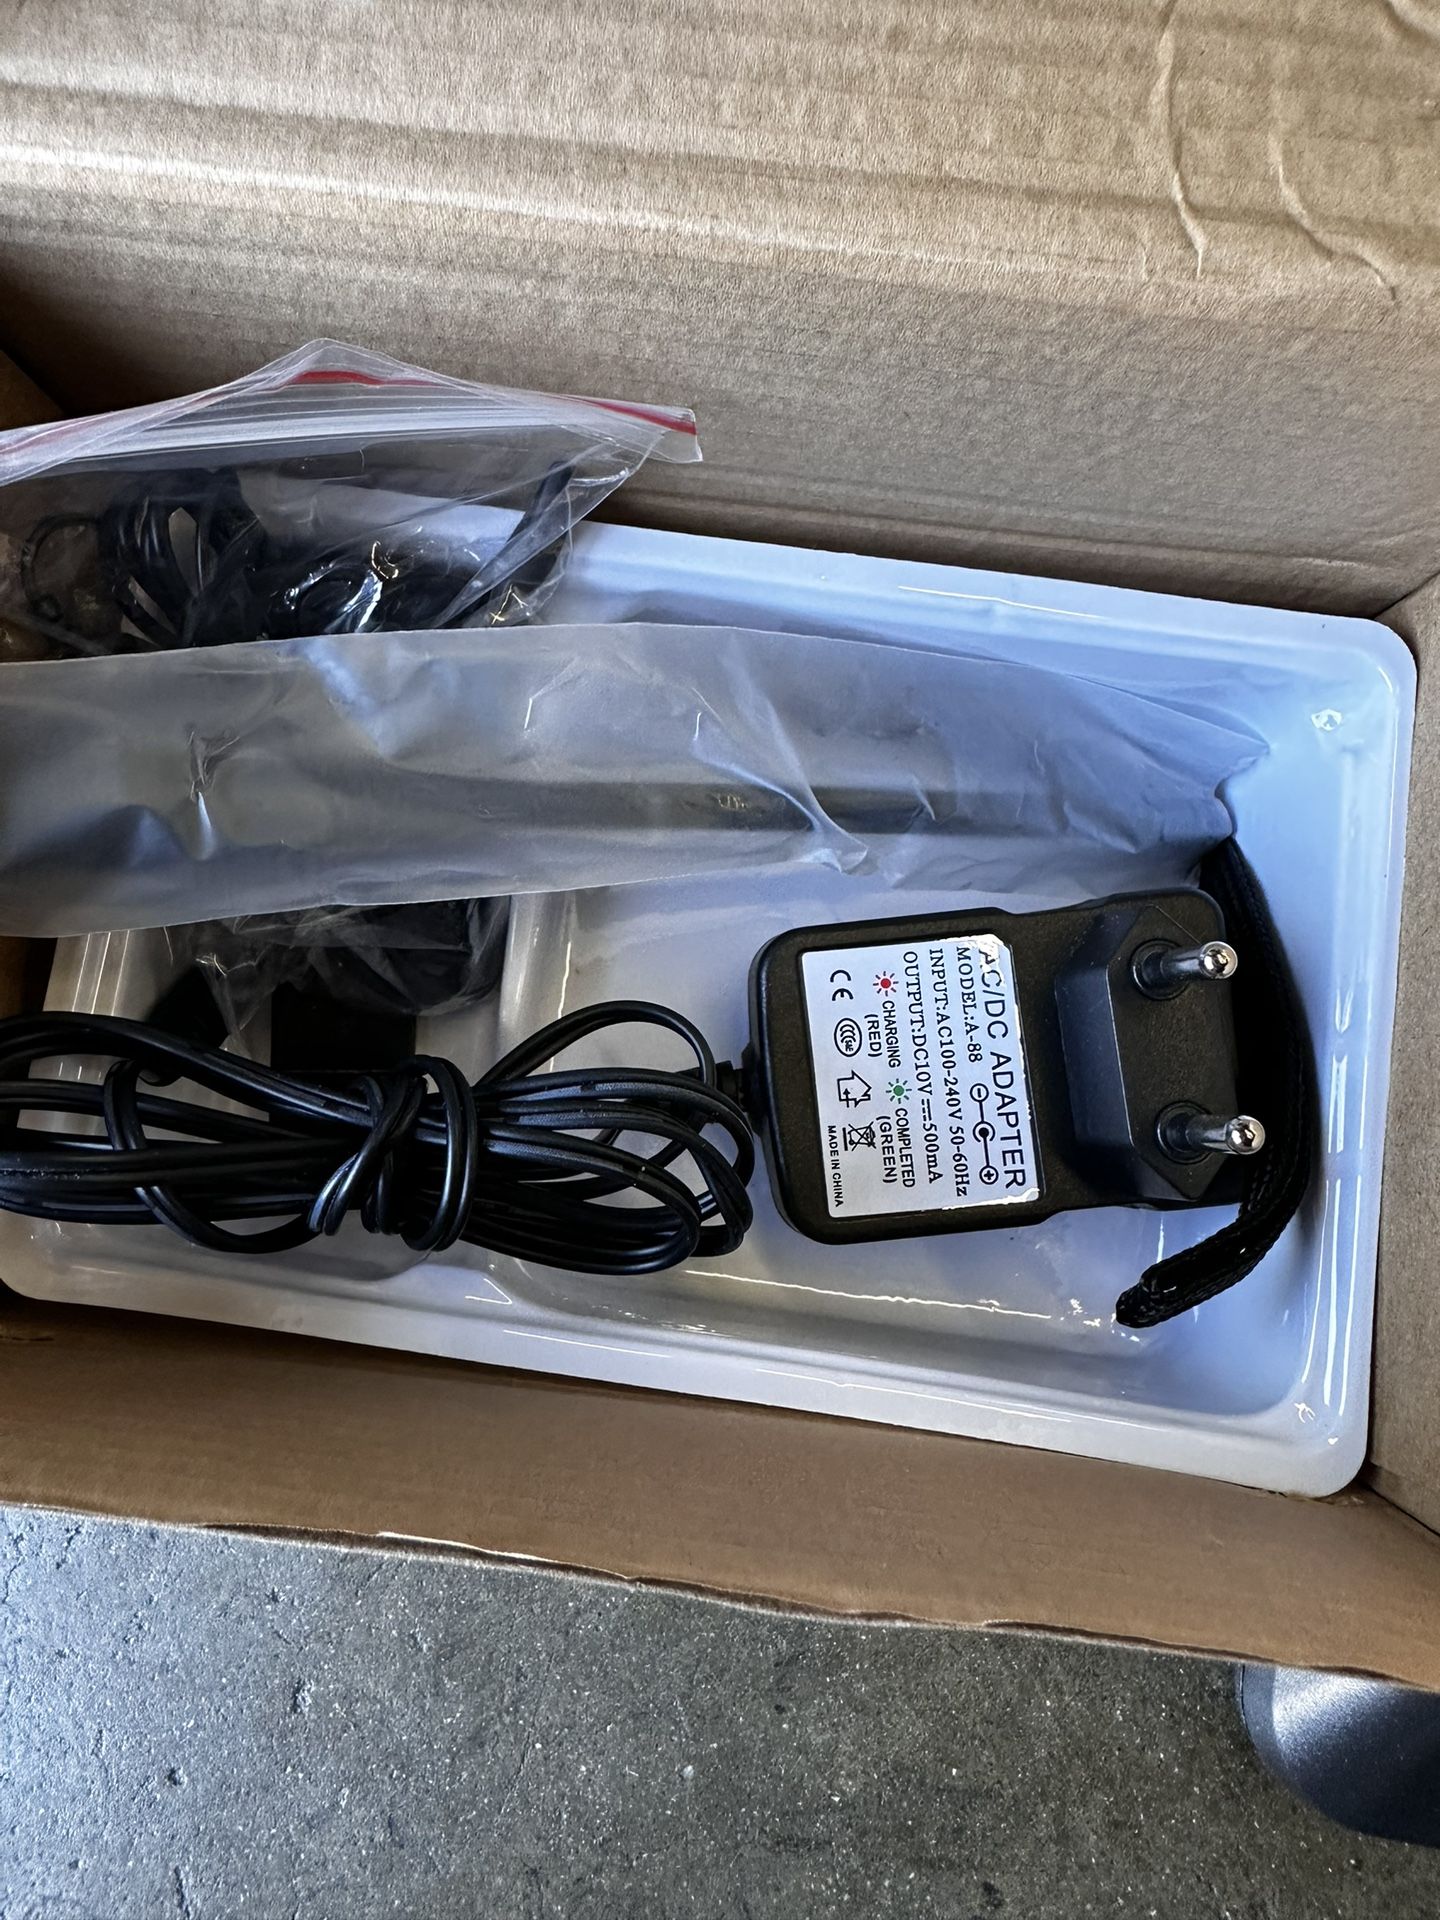 Tenway UV-5R Pro Dual Band Two Way Radio for Sale in Pomona, CA OfferUp